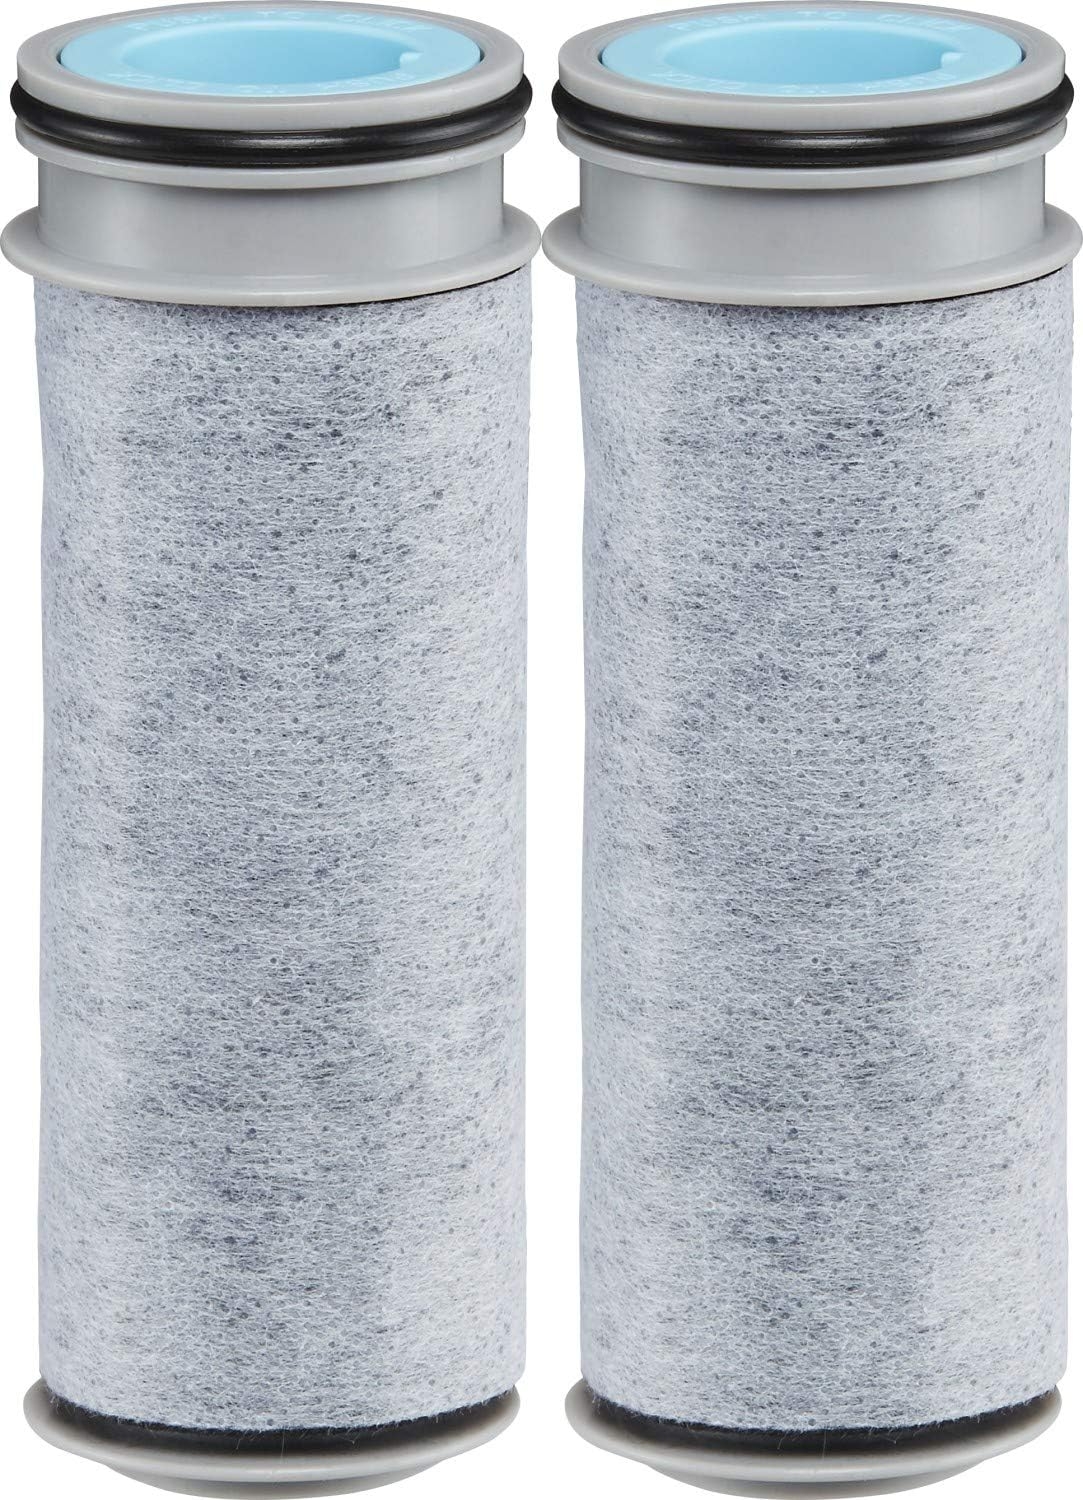 Brita Replacement Pour Through Filters, 2 Count (Pack of 1), Gray